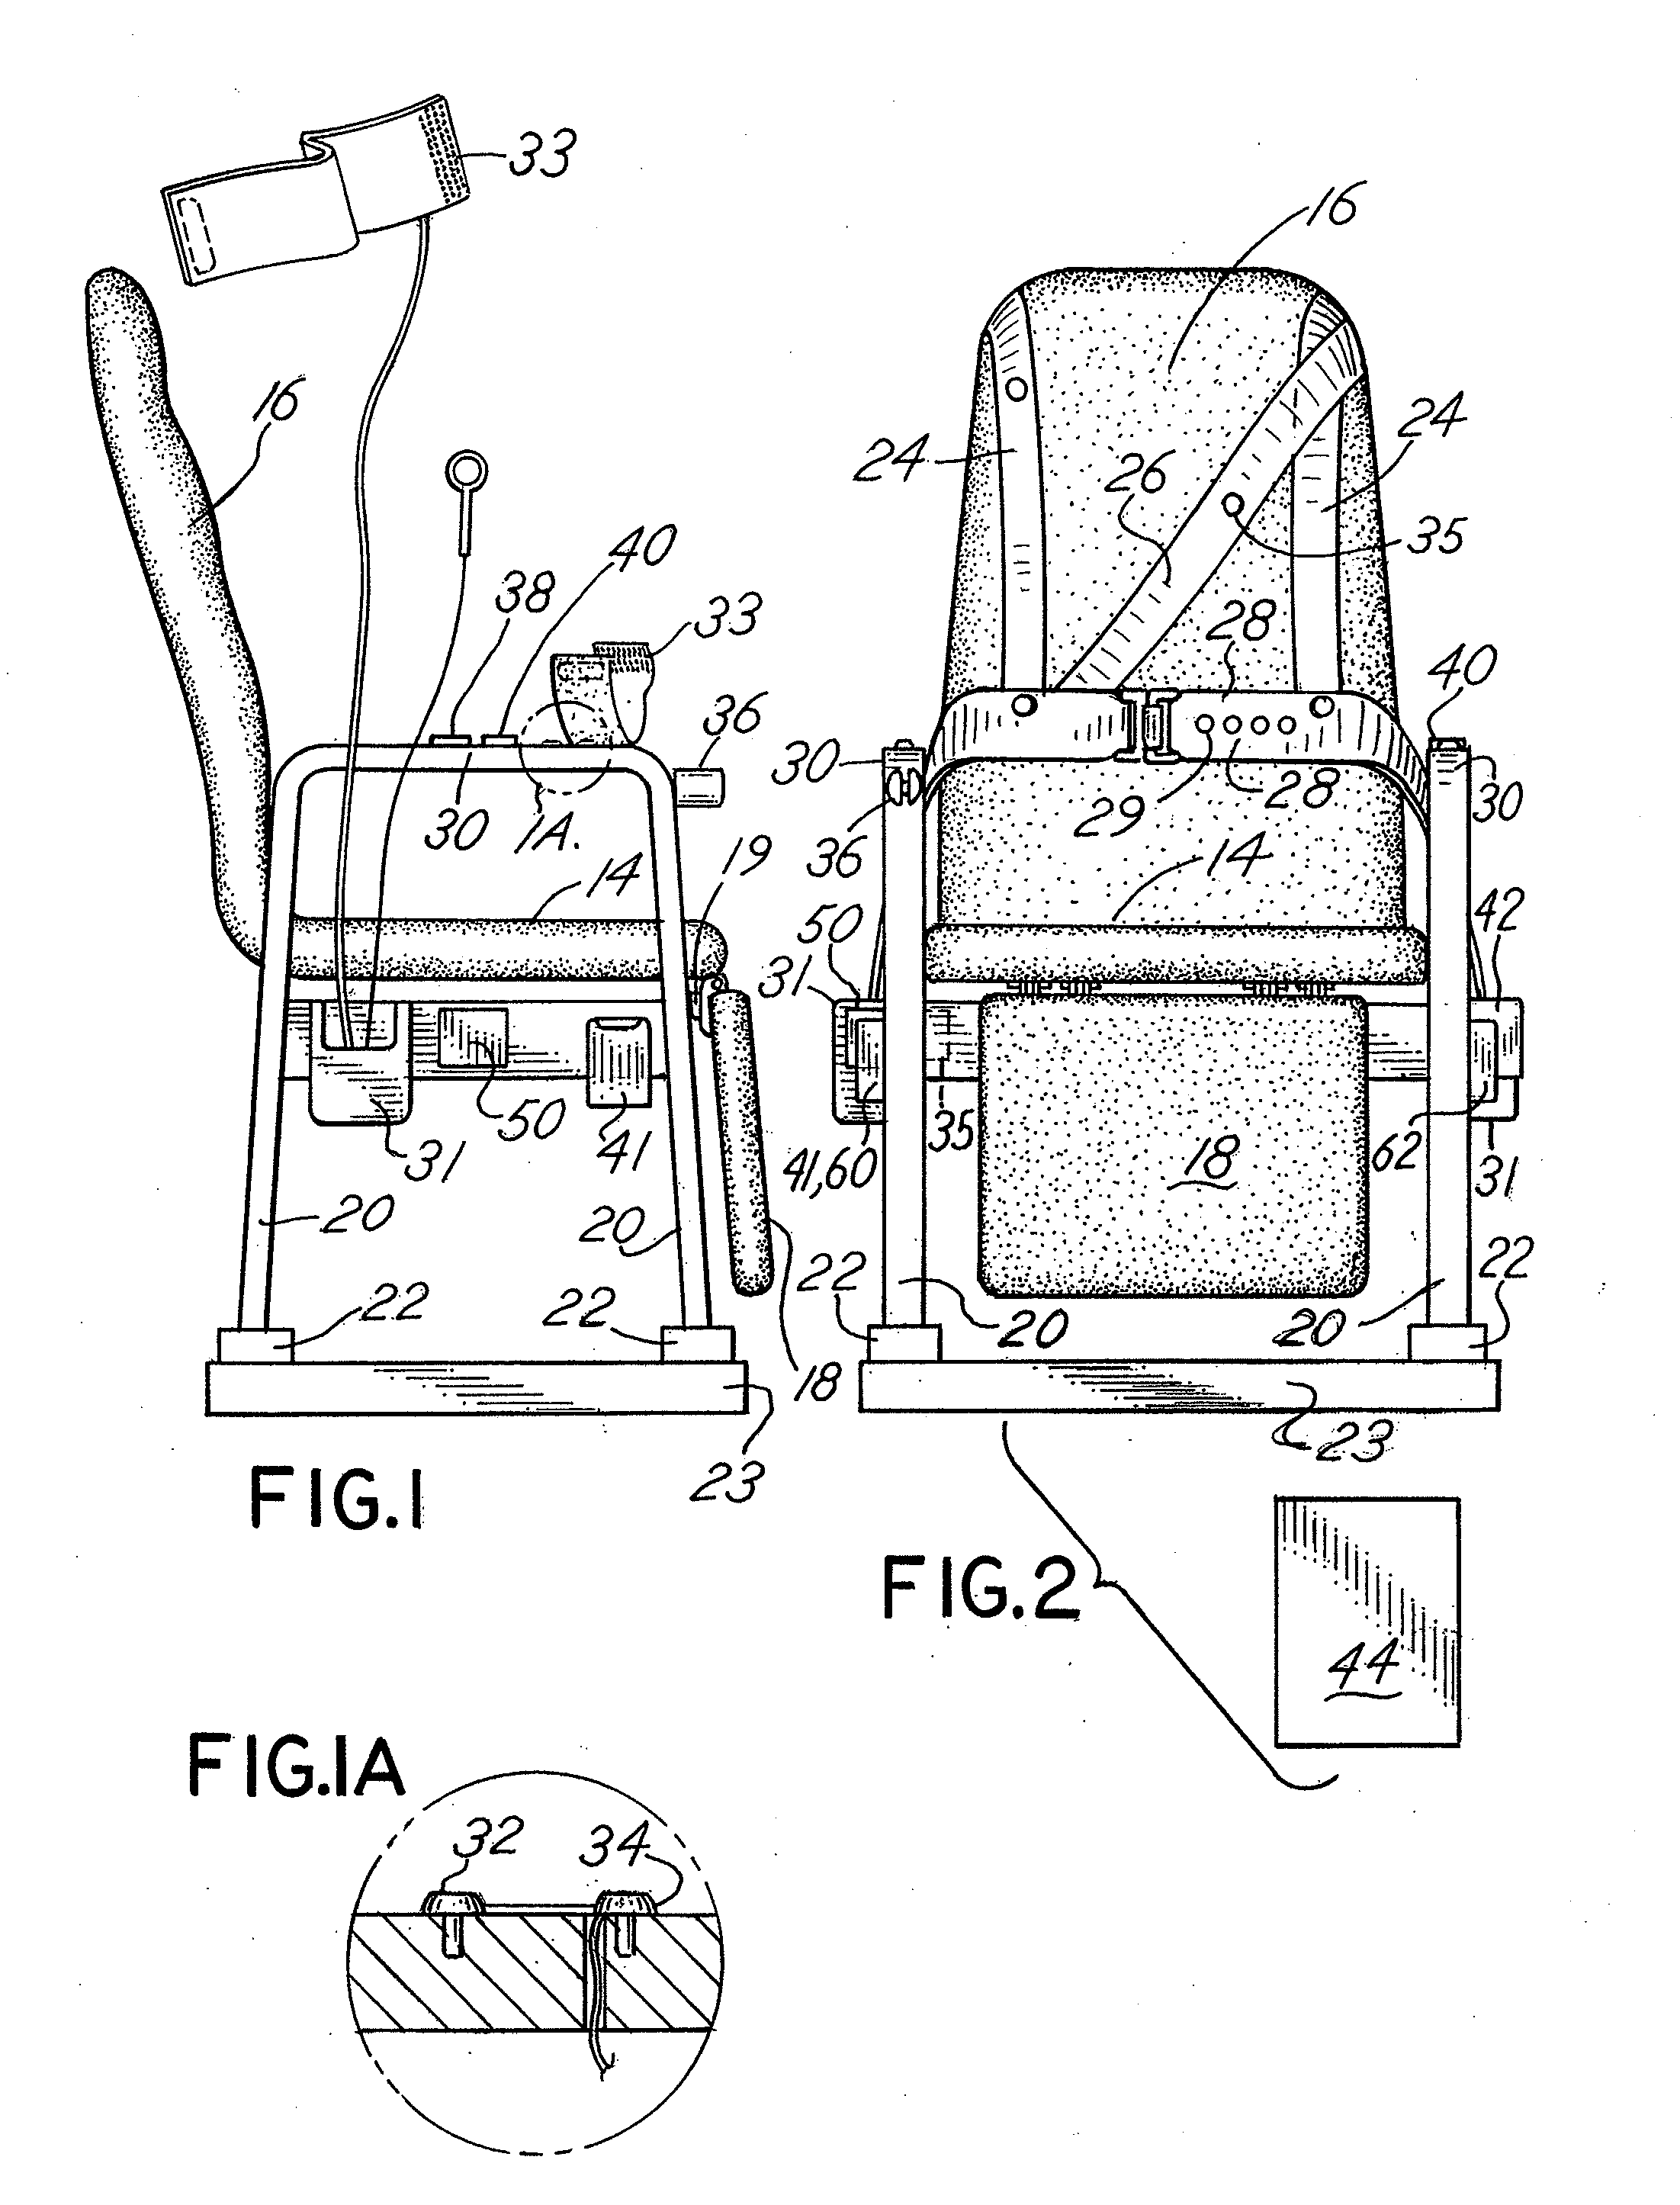 Medical Sensor Kit for Combination with a Chair to Enable Measurement of Diagnostic Information